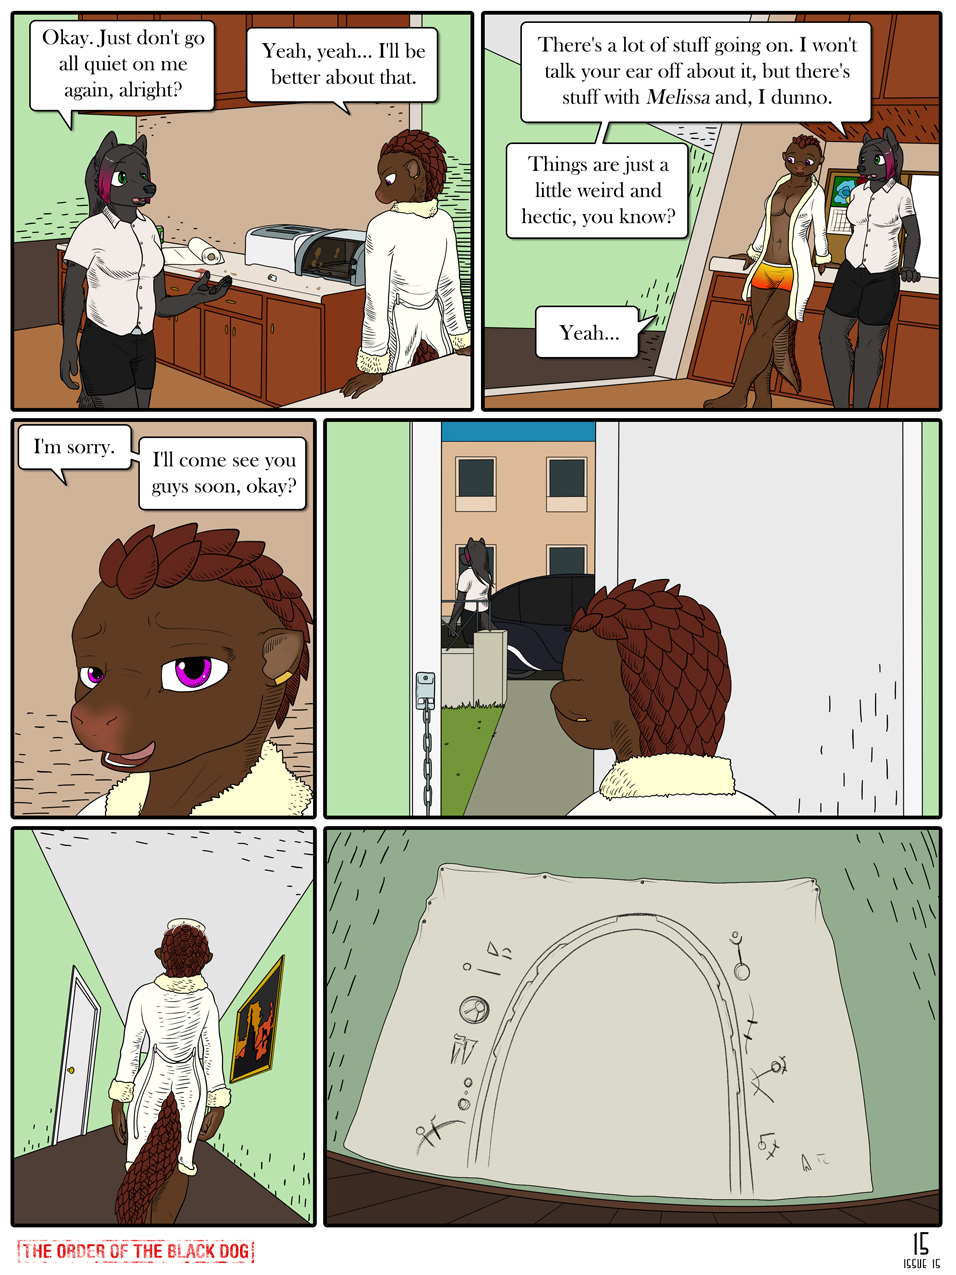 Issue 15, Page 15